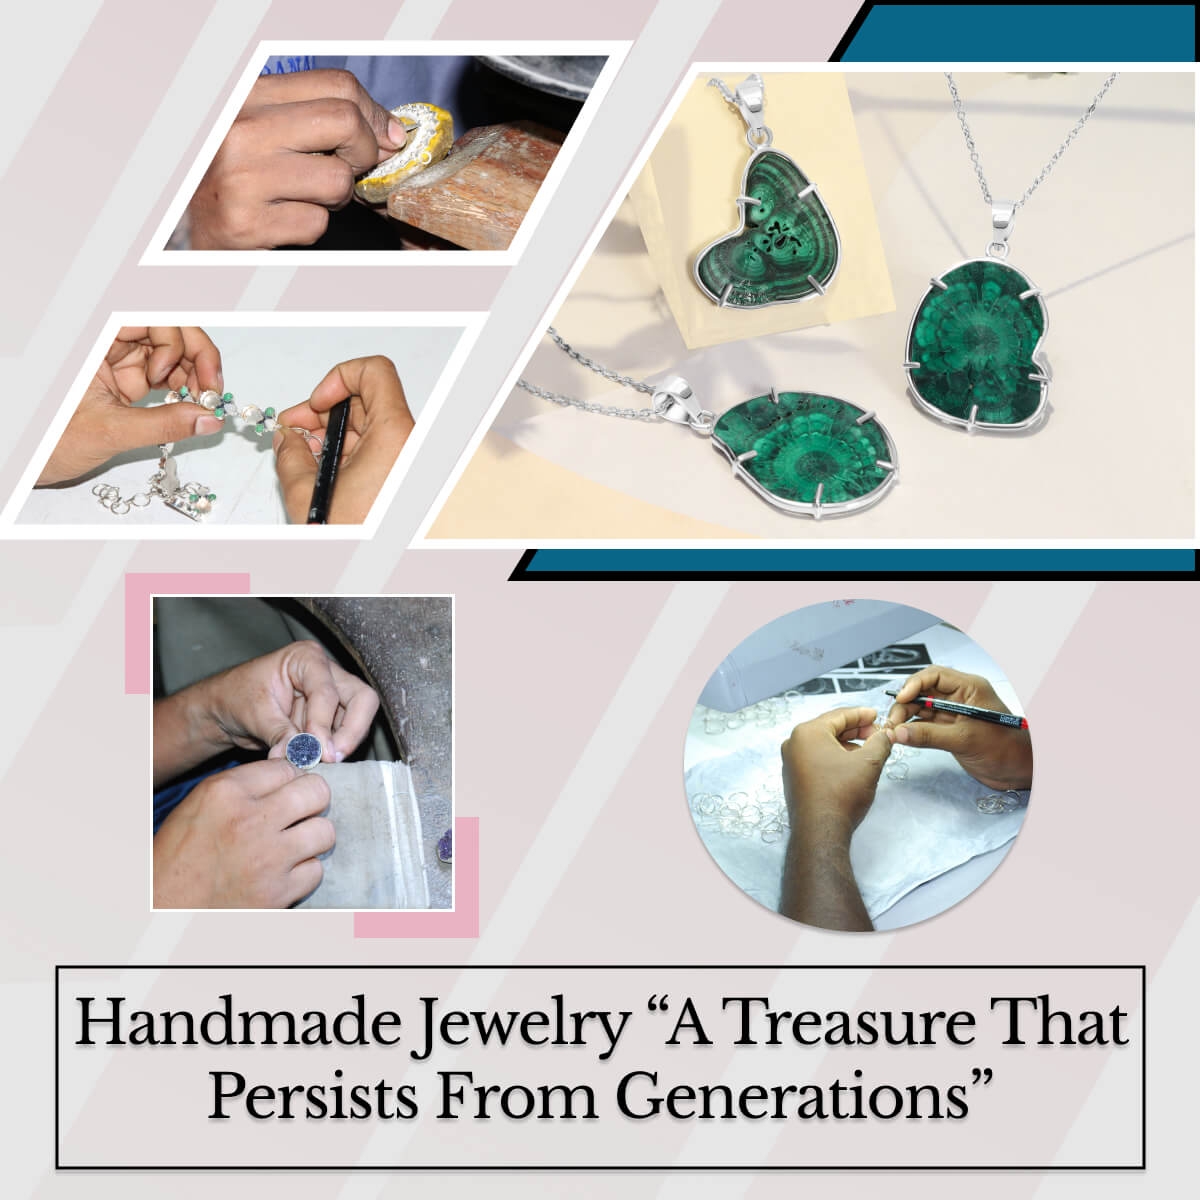 Time Determines the Value of Handmade Jewelry